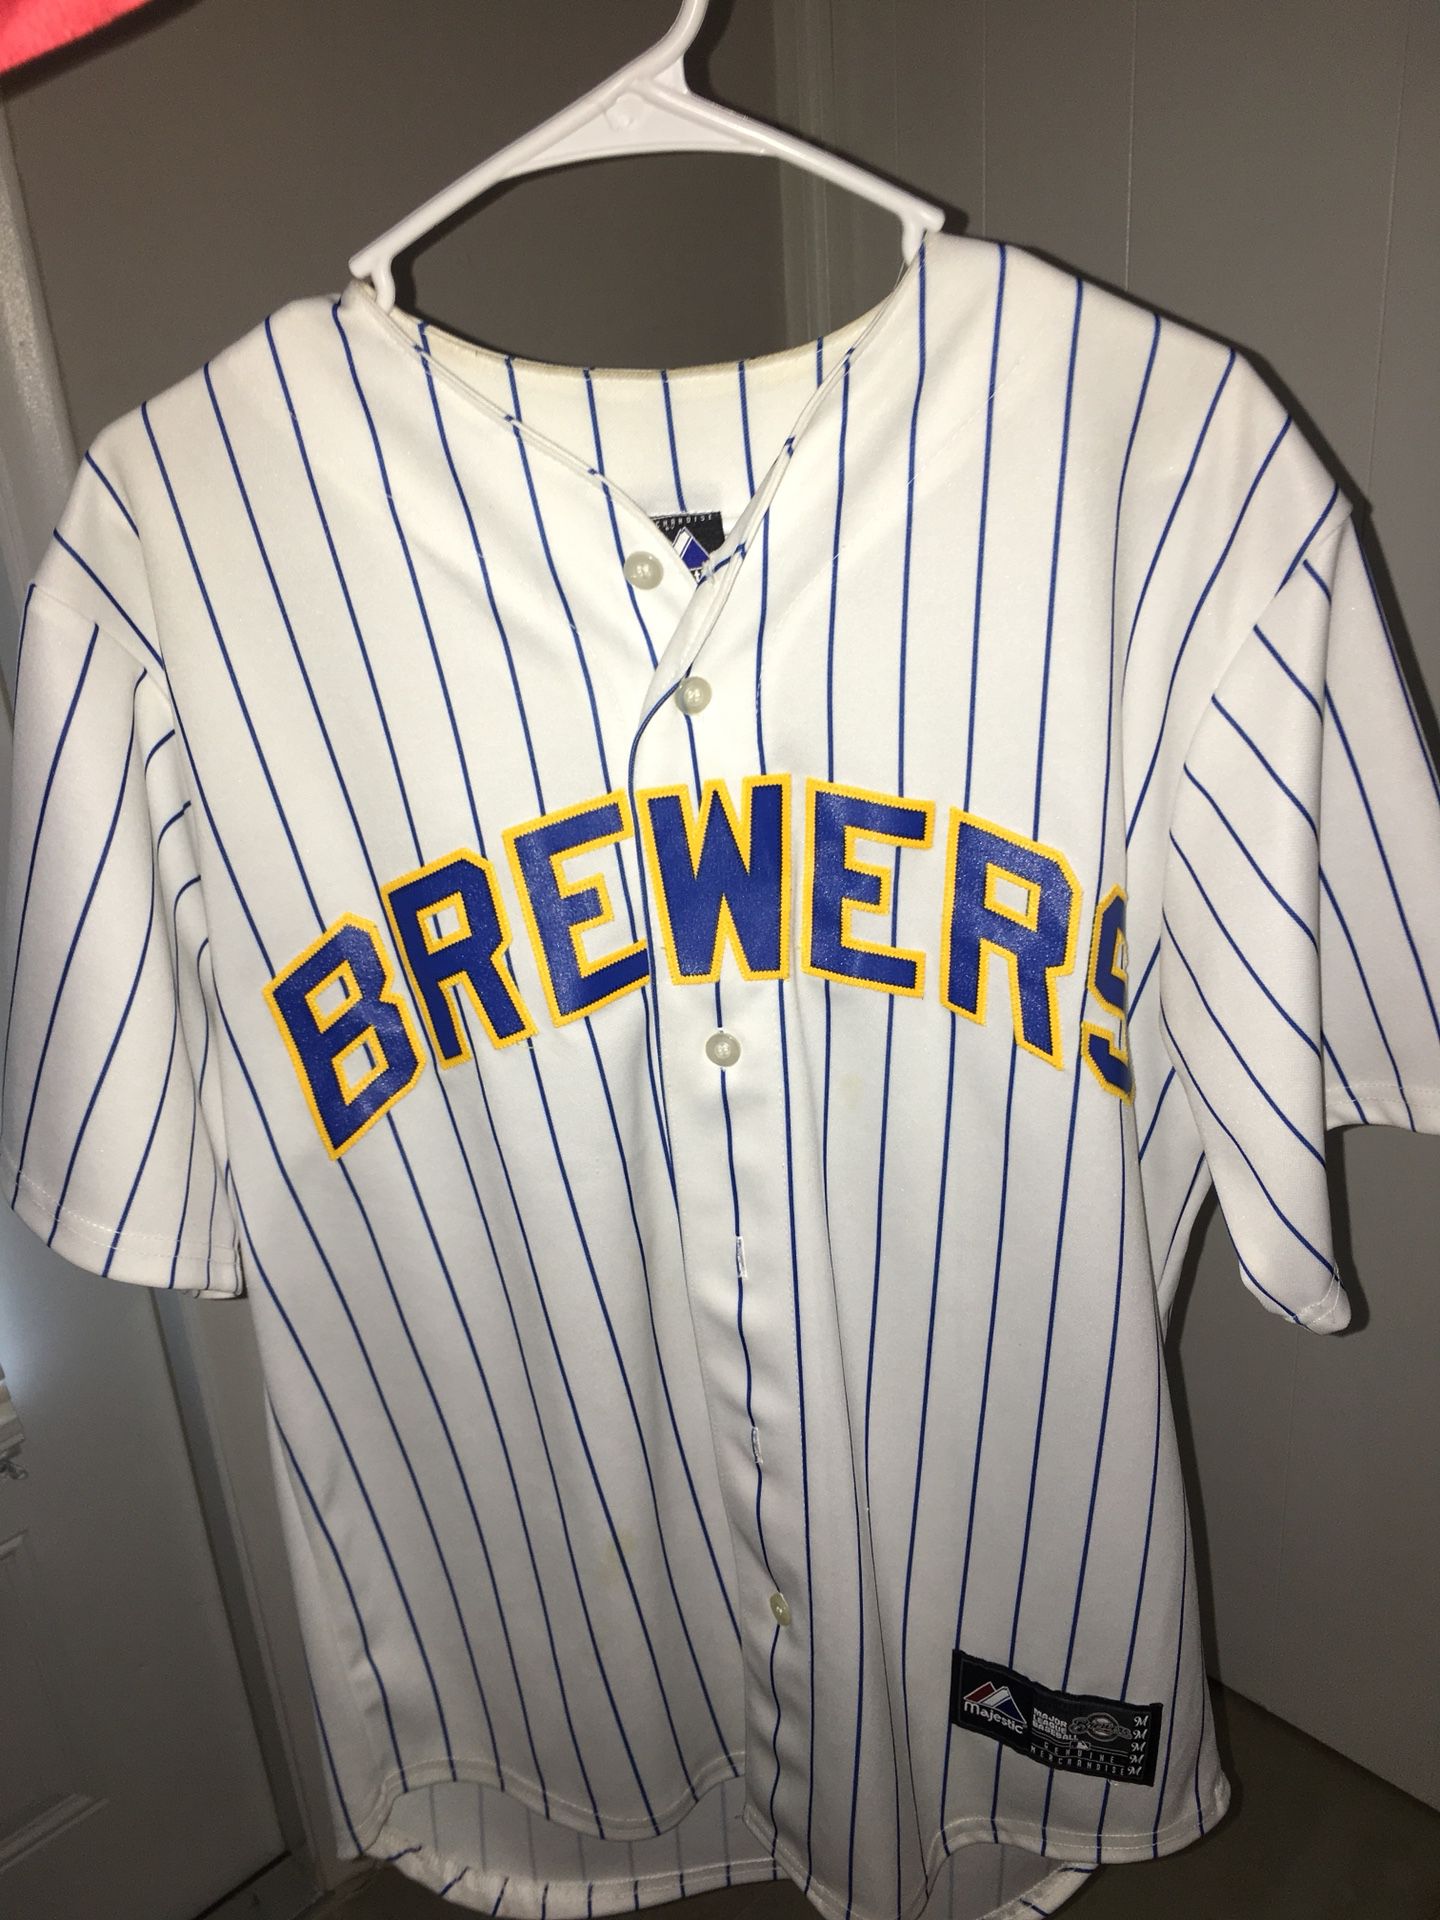 Milwaukee Brewers Authentic Retro Baseball Jersey for Sale in Boca Raton,  FL - OfferUp